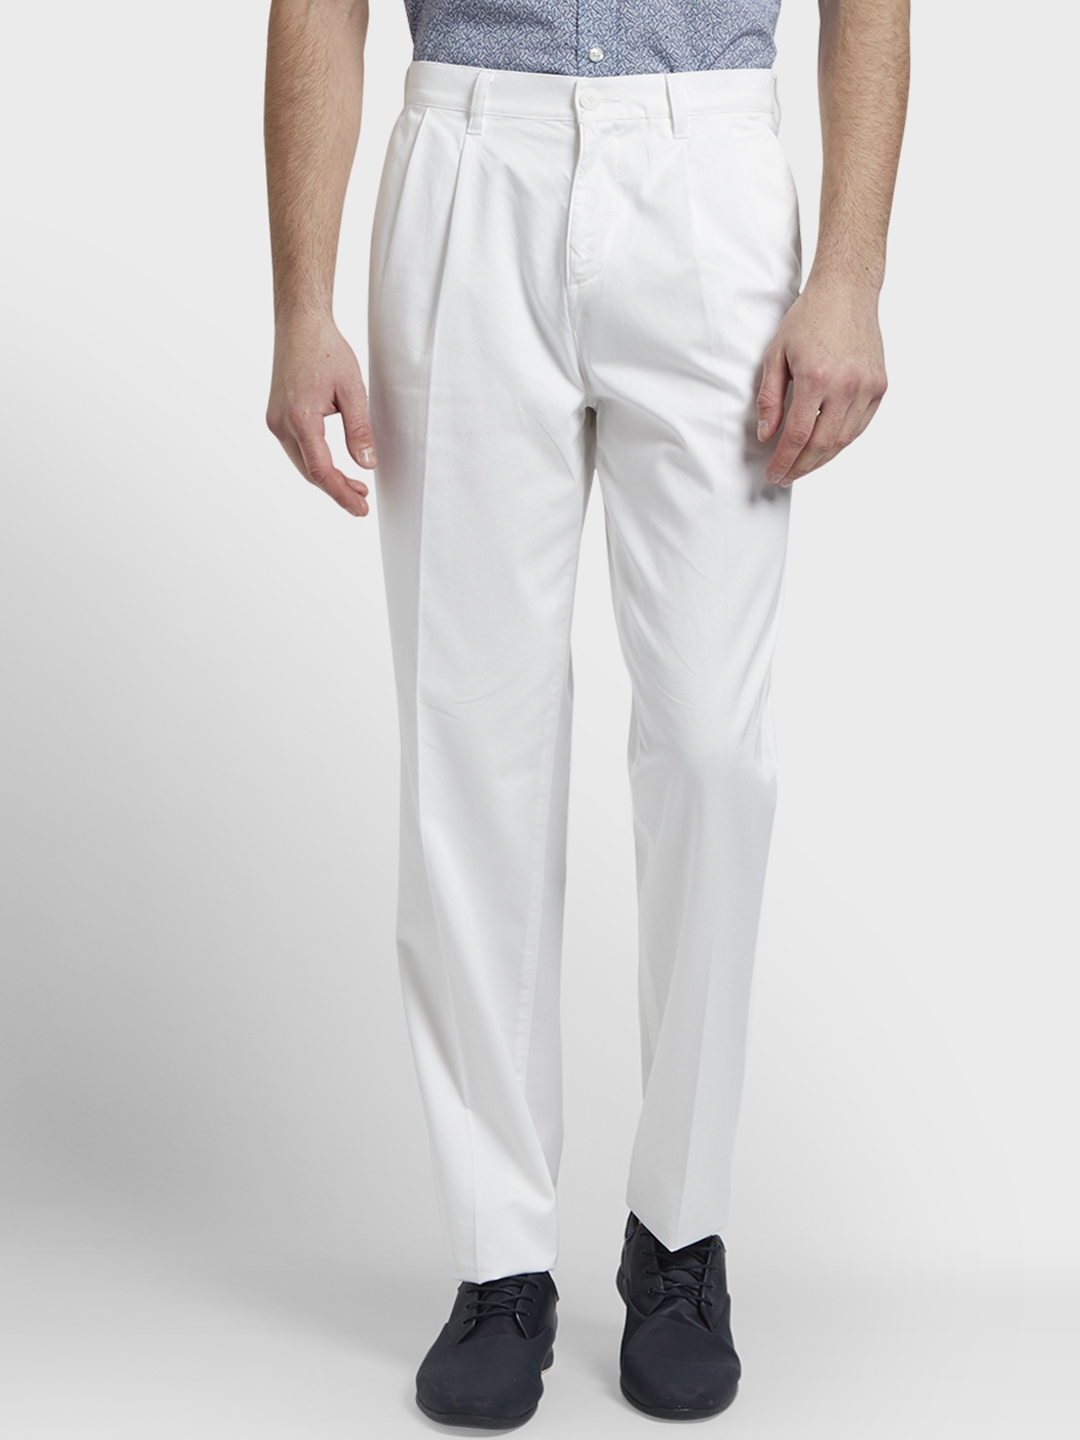 Buy ColorPlus Men White Regular Fit Solid Formal Trousers - Trousers ...